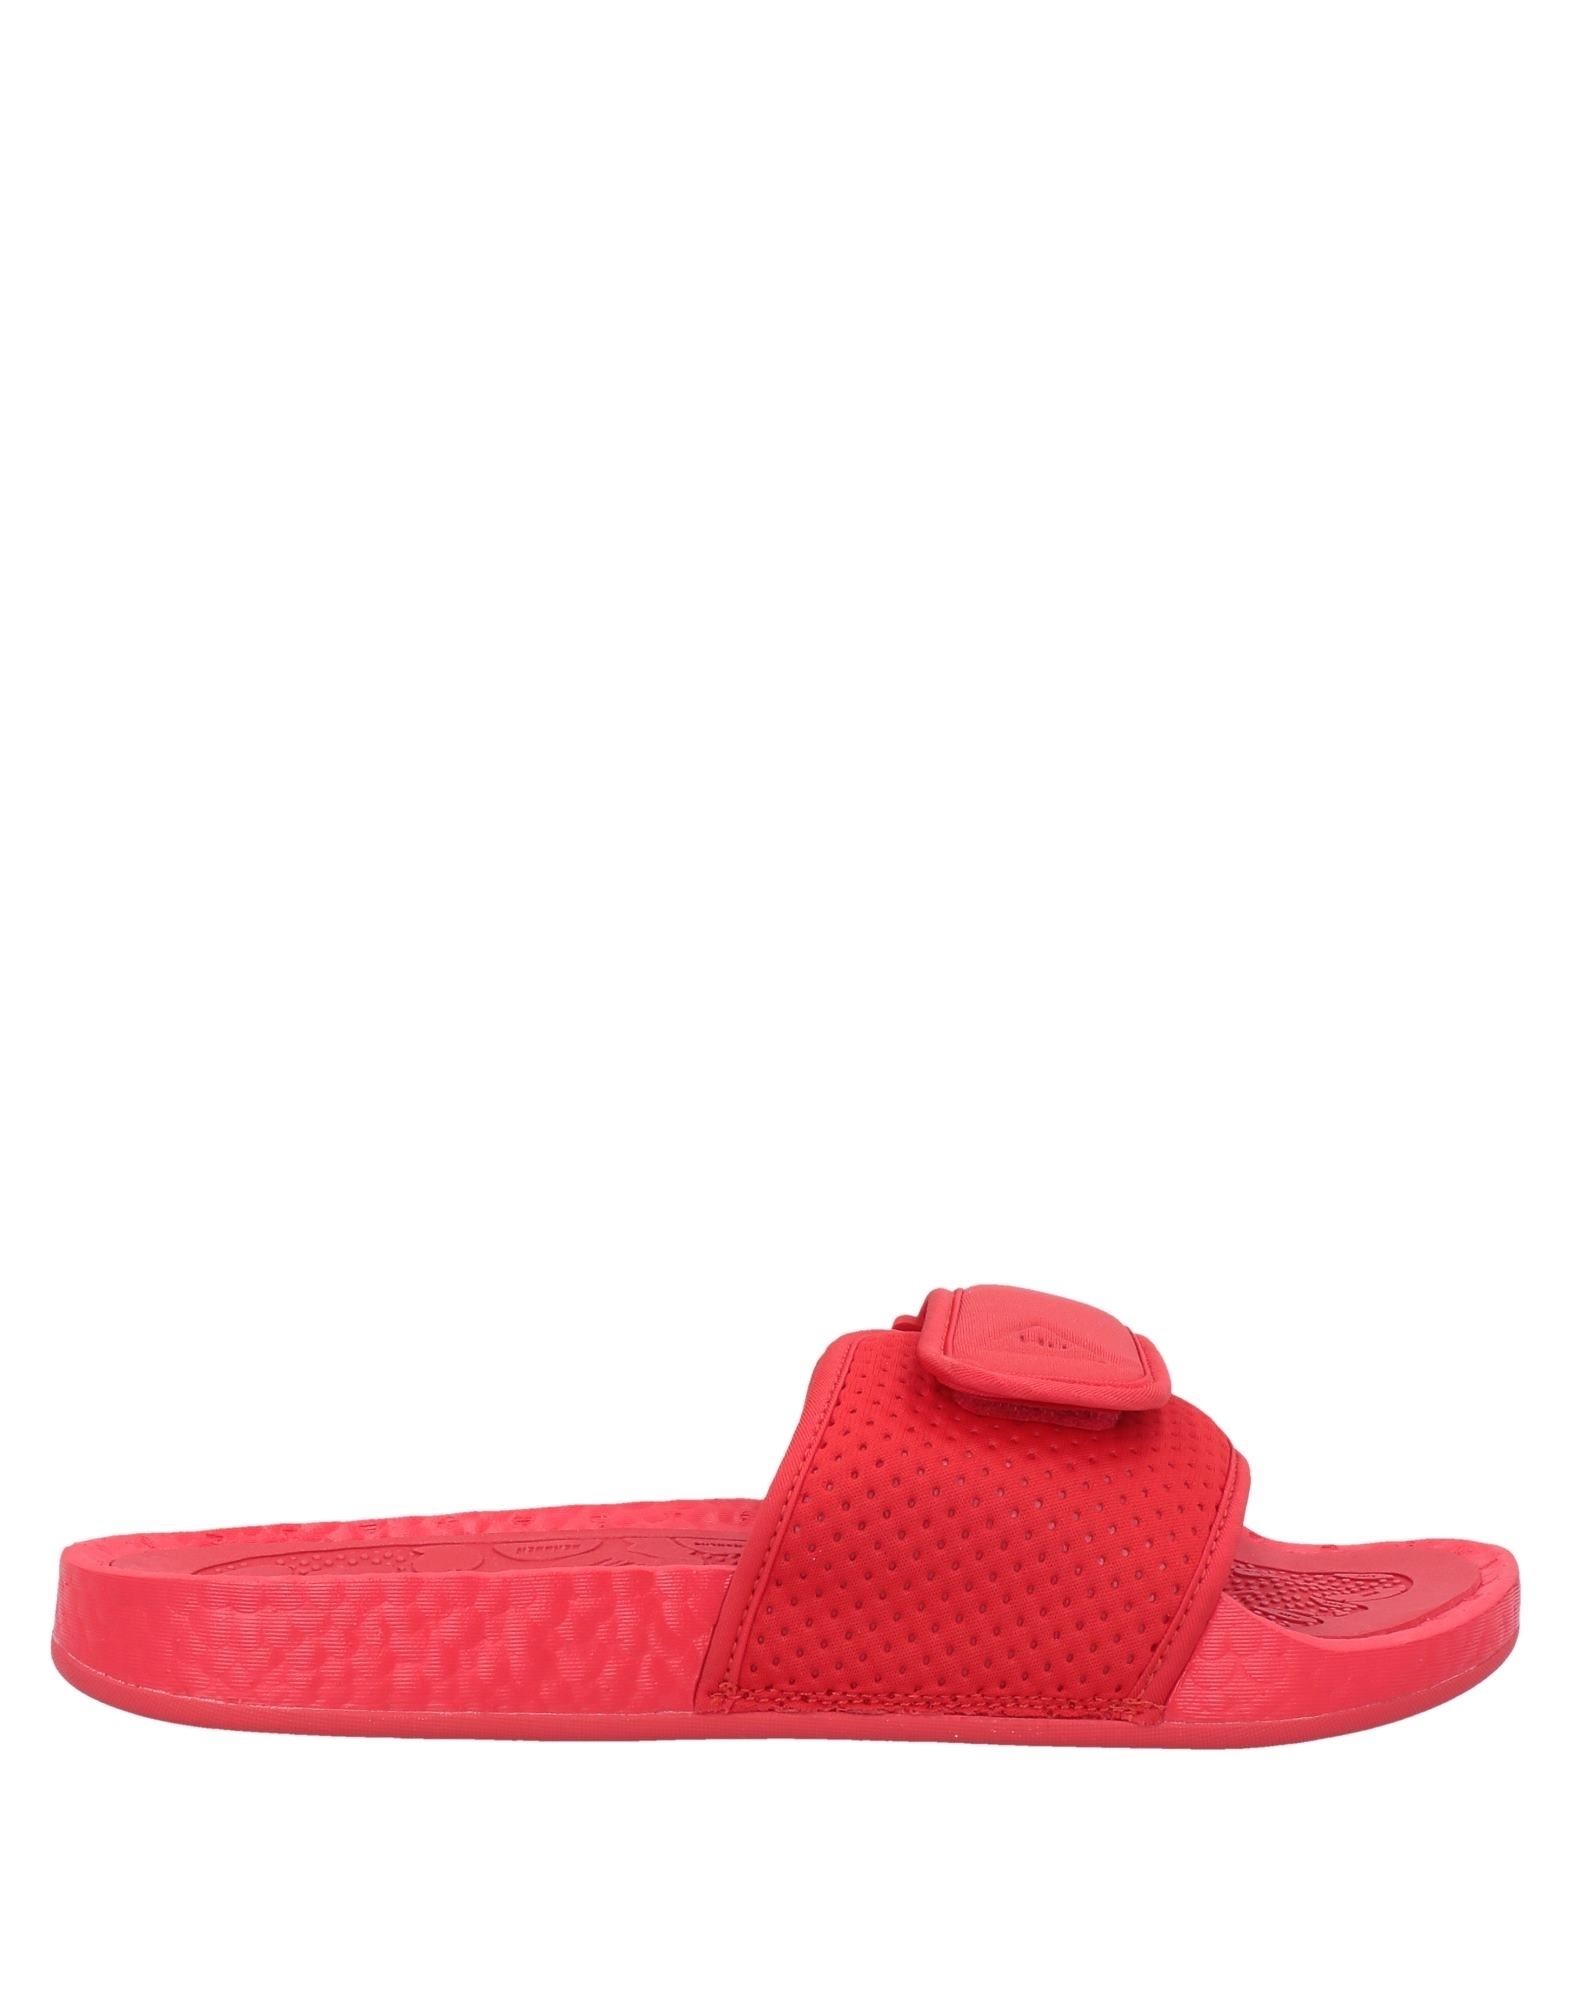 Adidas Originals By Pharrell Williams Sandals In Red